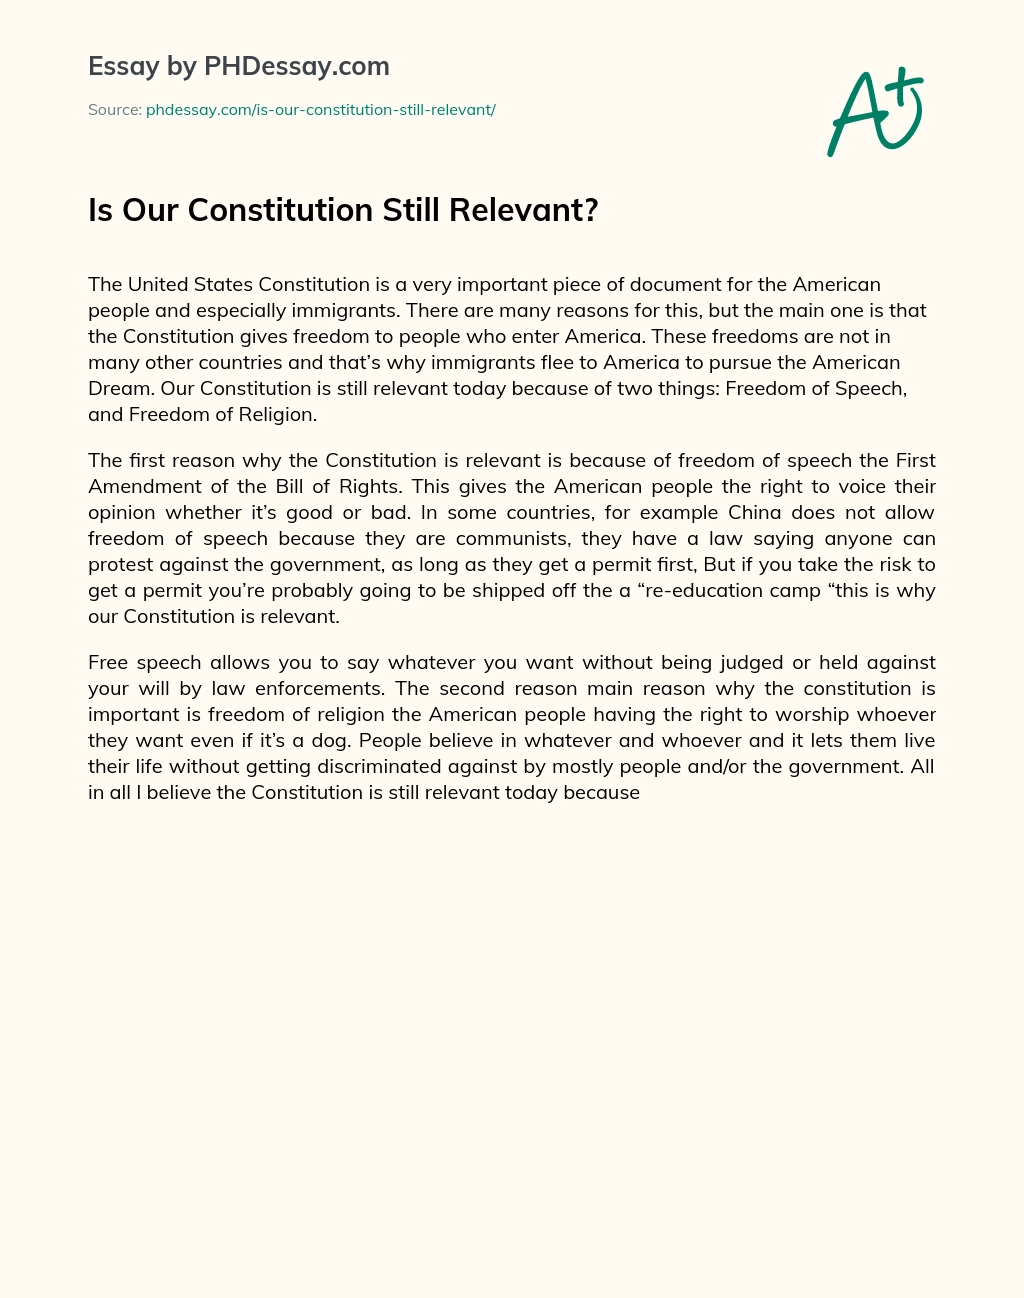 Is Our Constitution Still Relevant? essay